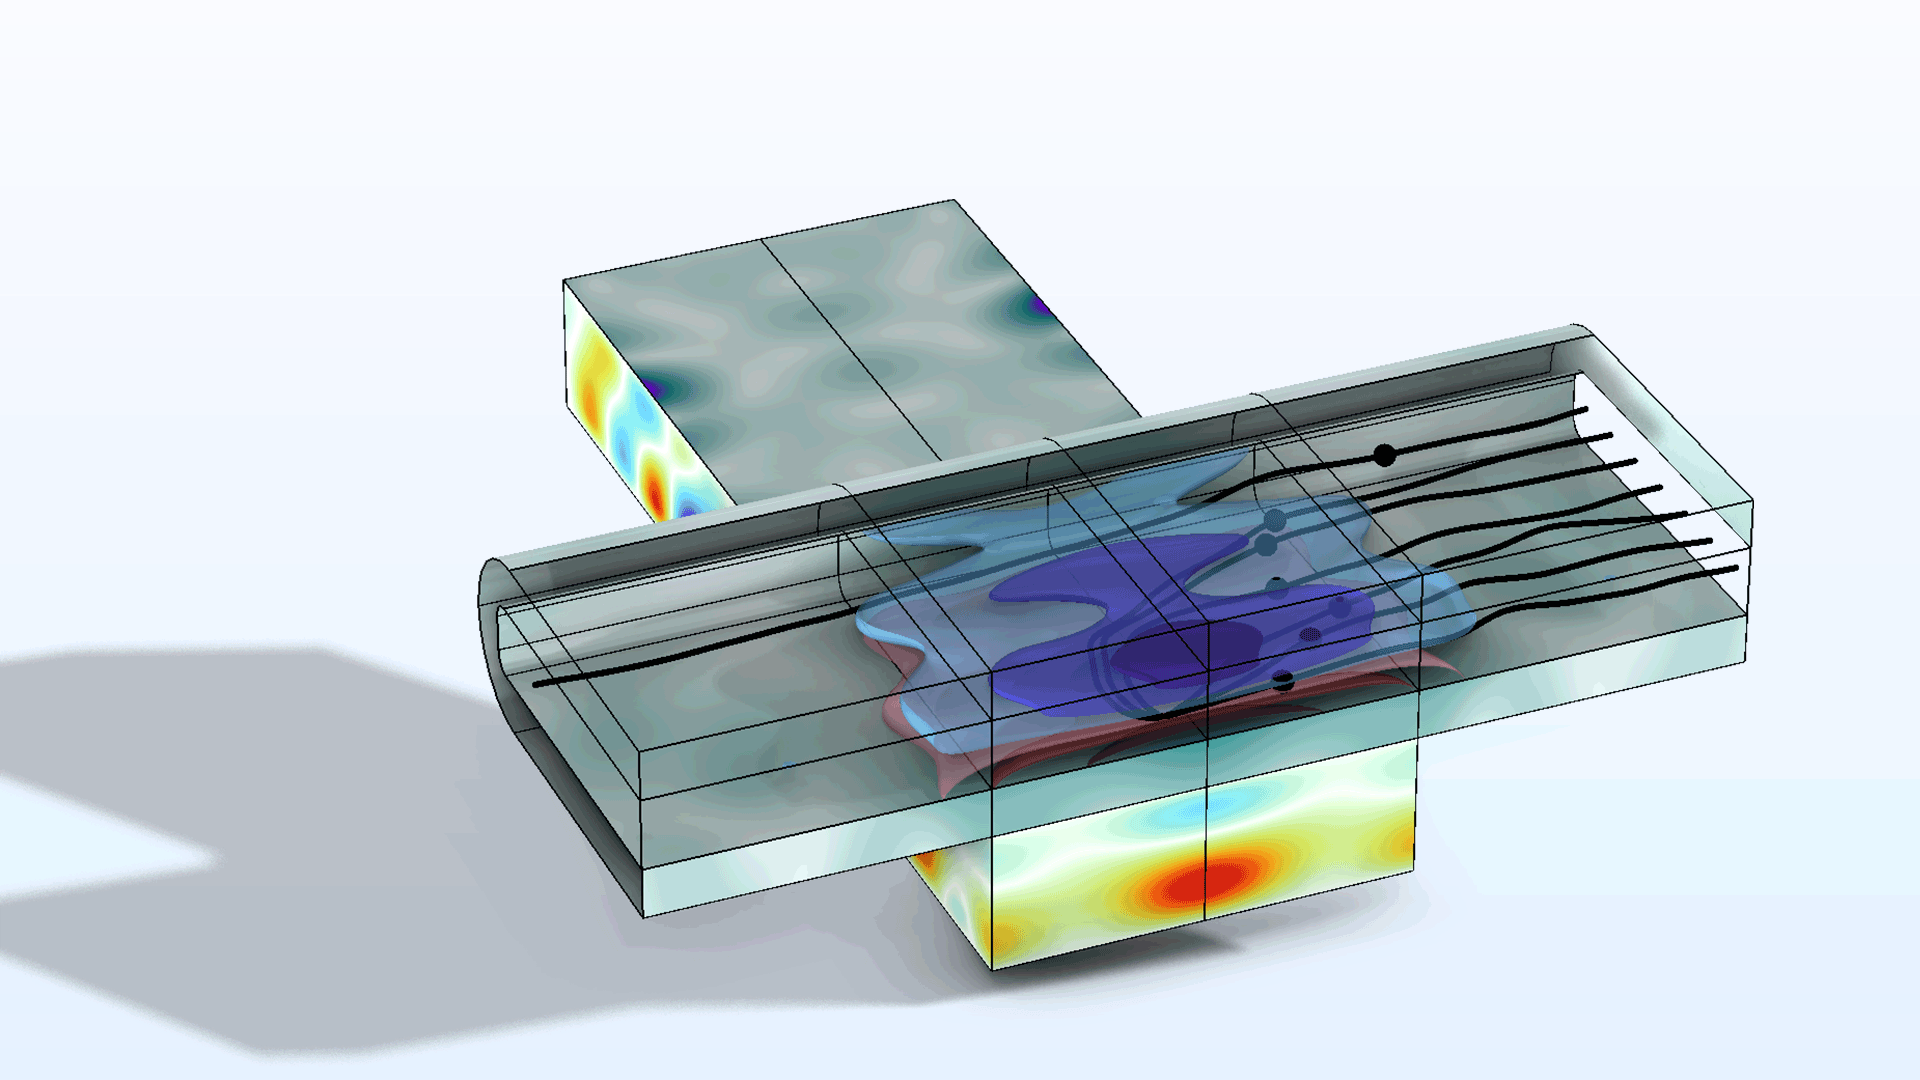 A glass capillary model showing the drag forces created from acoustic flow in the Thermal Wave color table.